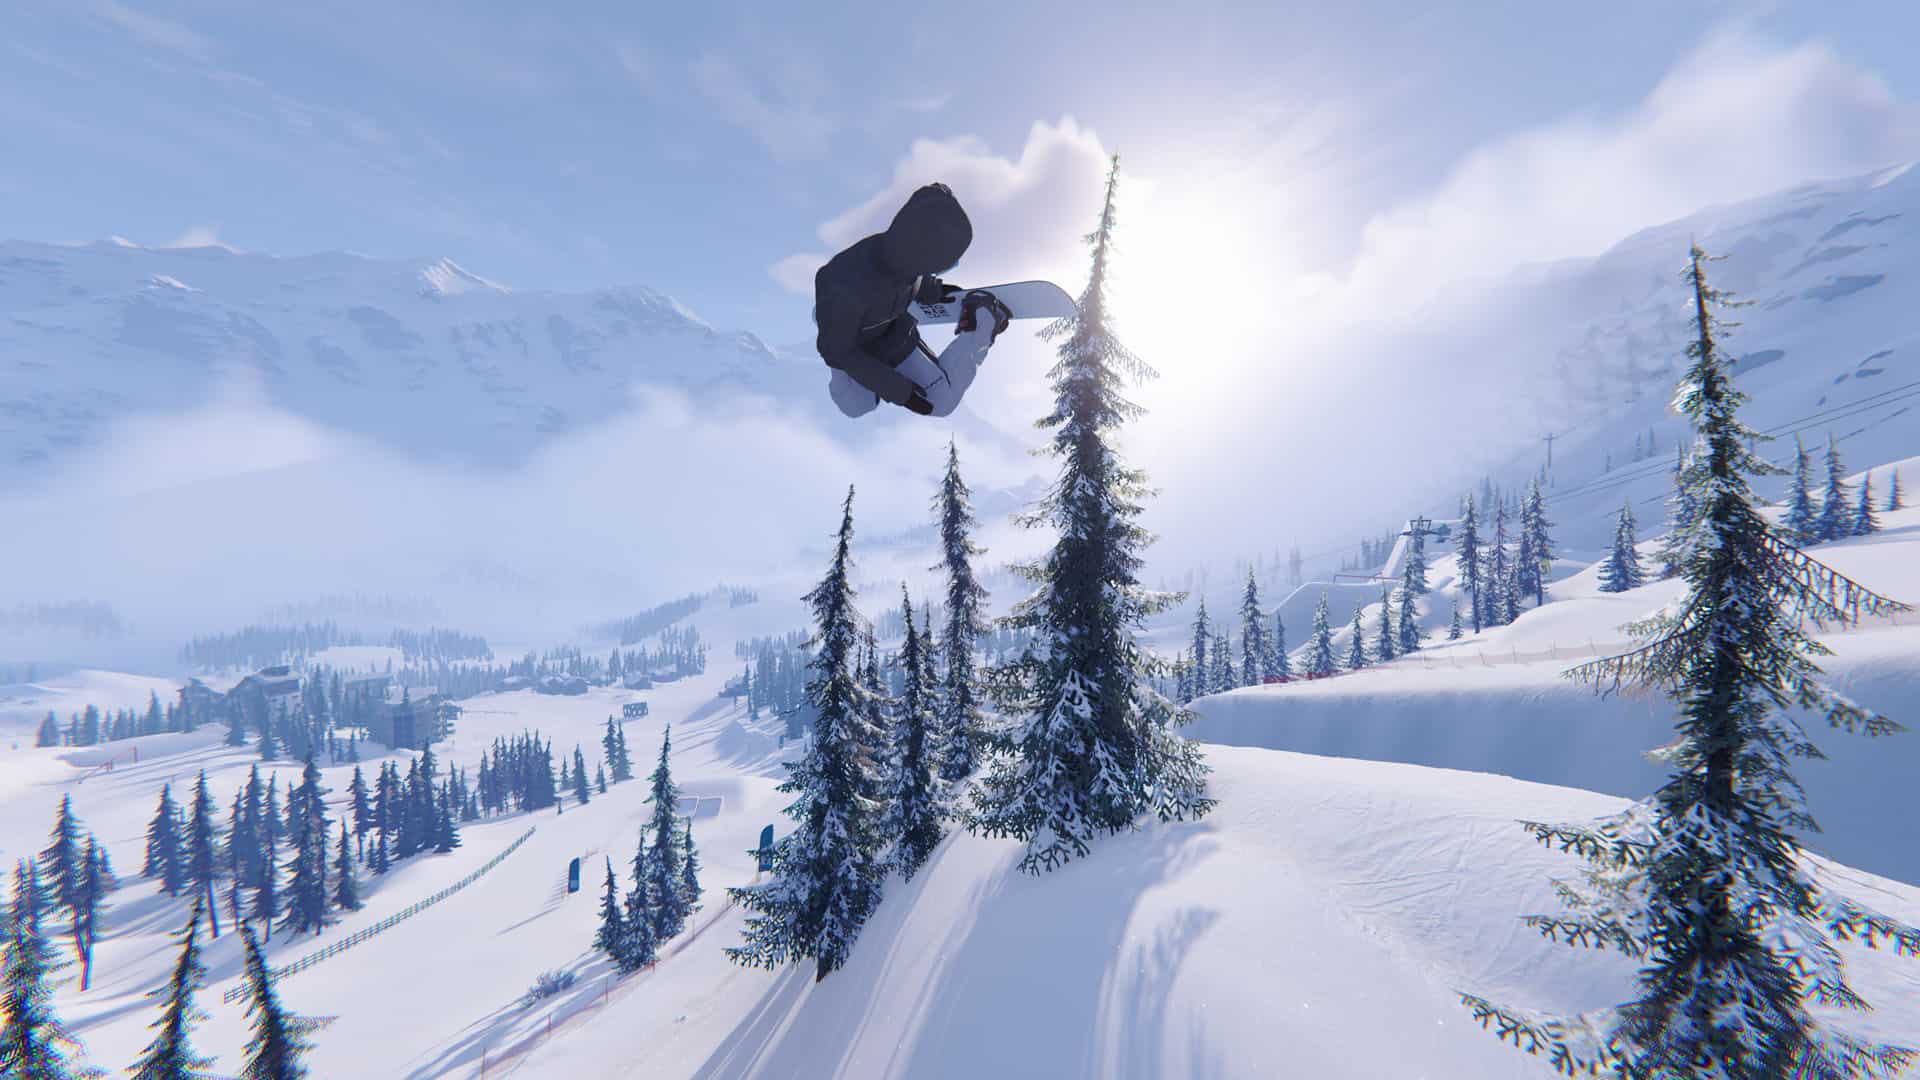 Shredders launches onto the slopes March 17 on Xbox Series X|S and PC